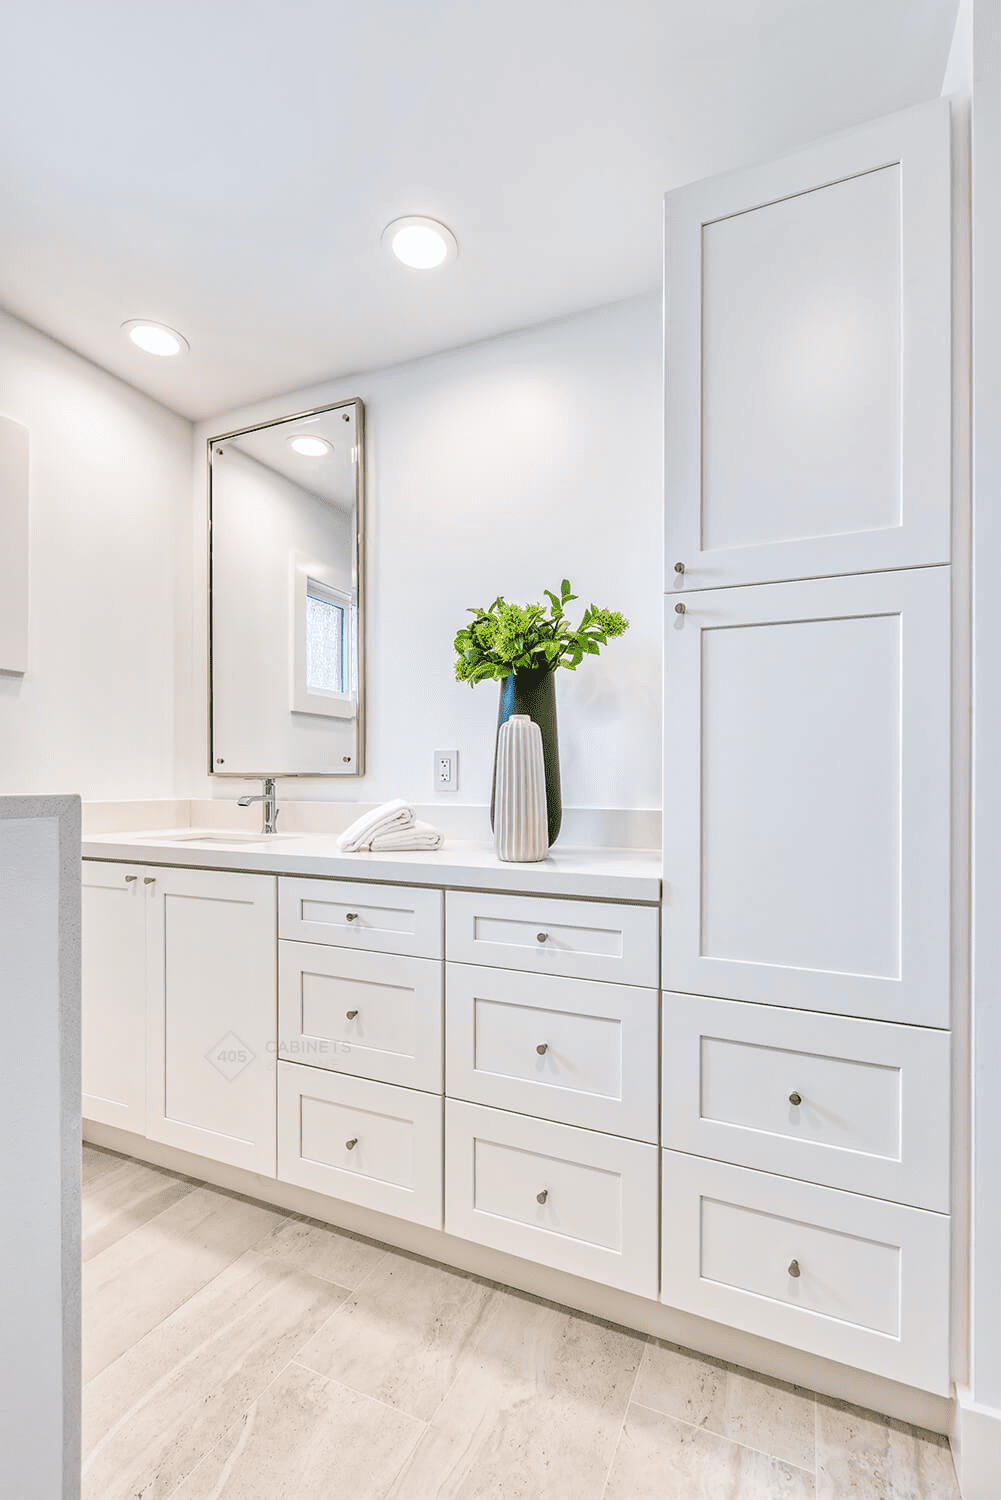 Maximizing Vertical Space with Tall Bath Cabinets - image3